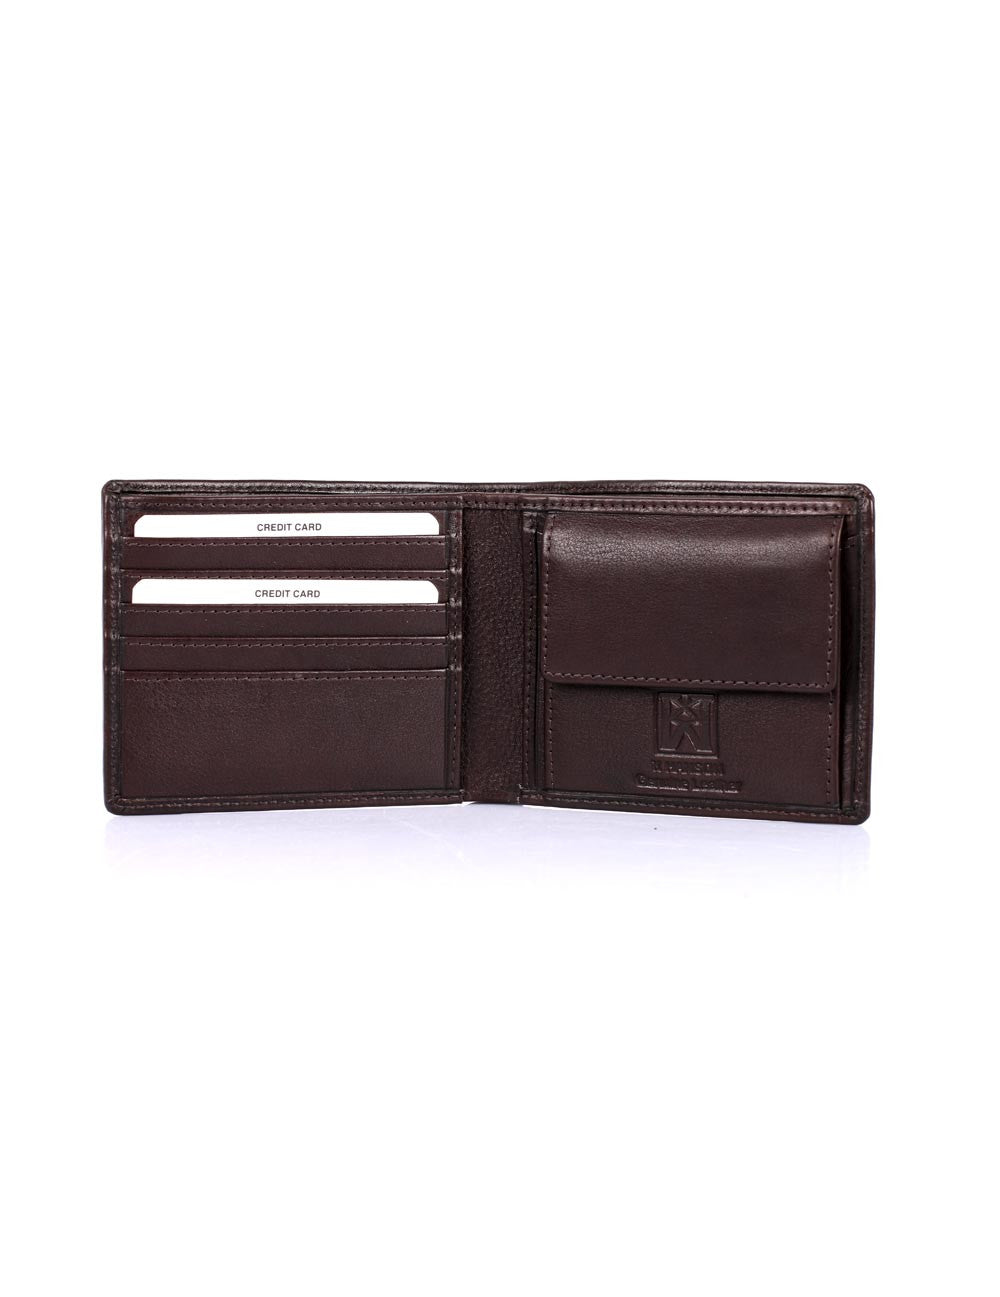 men's black leather wallet with coin pocket — MUSEUM OUTLETS